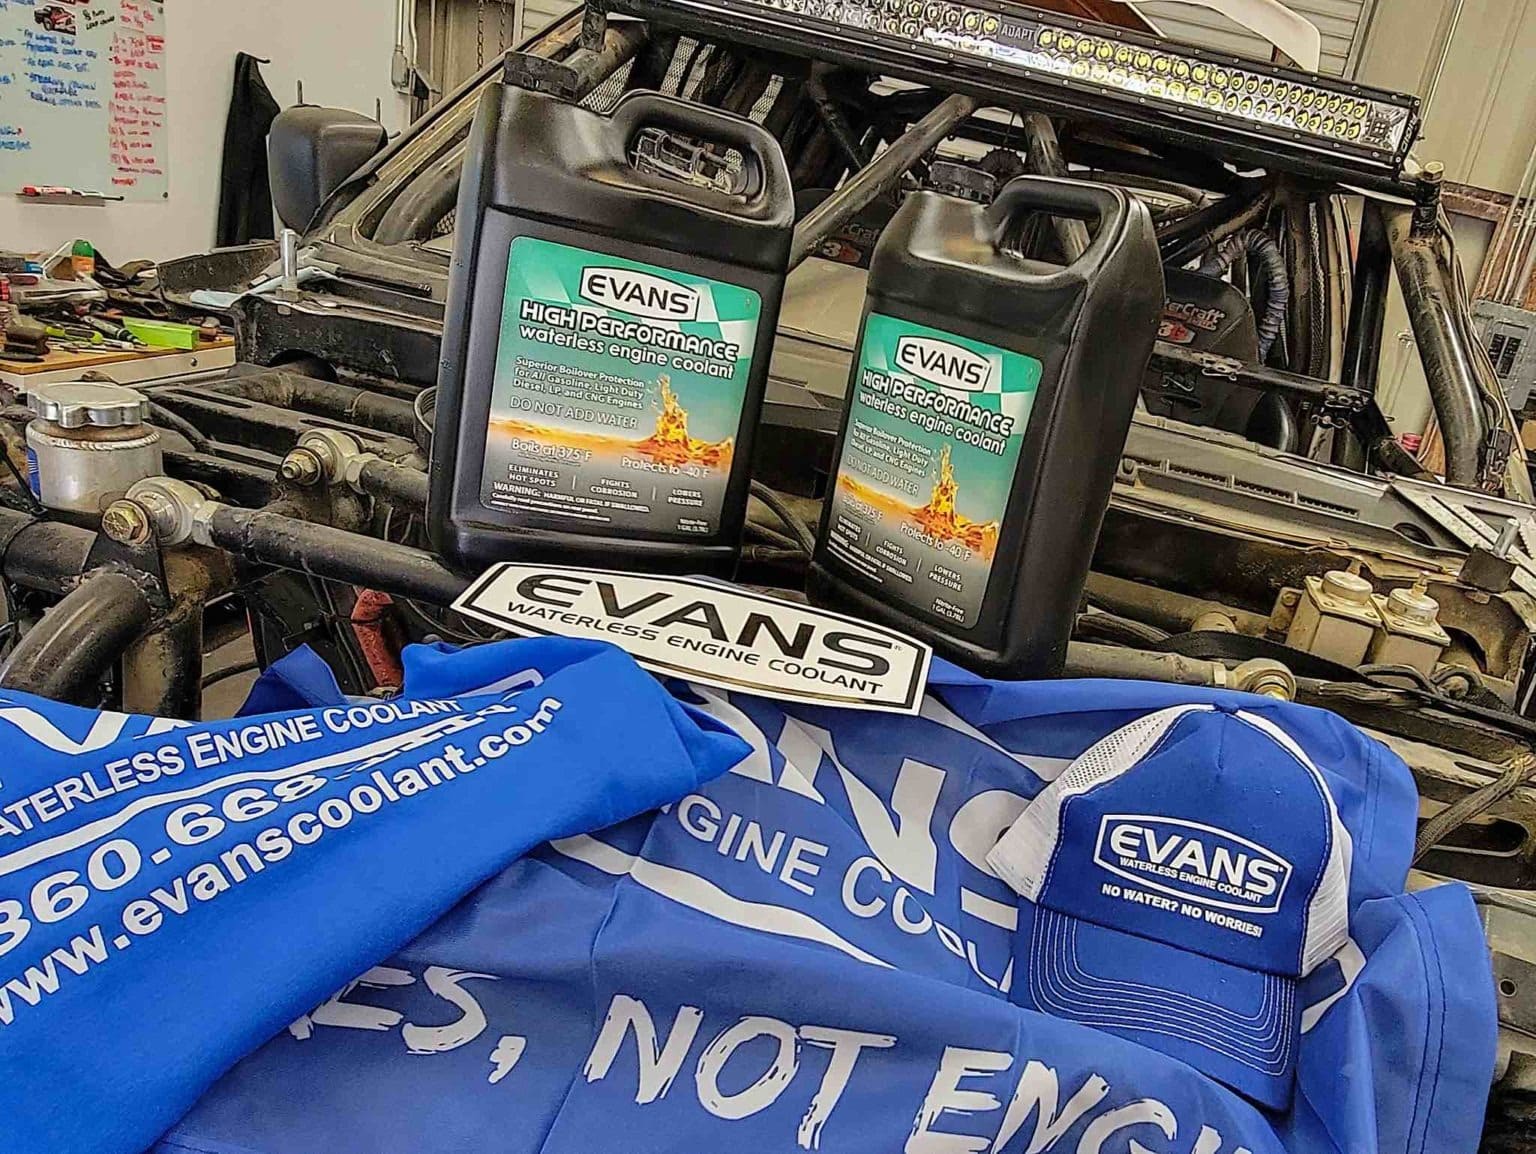 A jug of Evans High Performance Waterless Engine Coolant